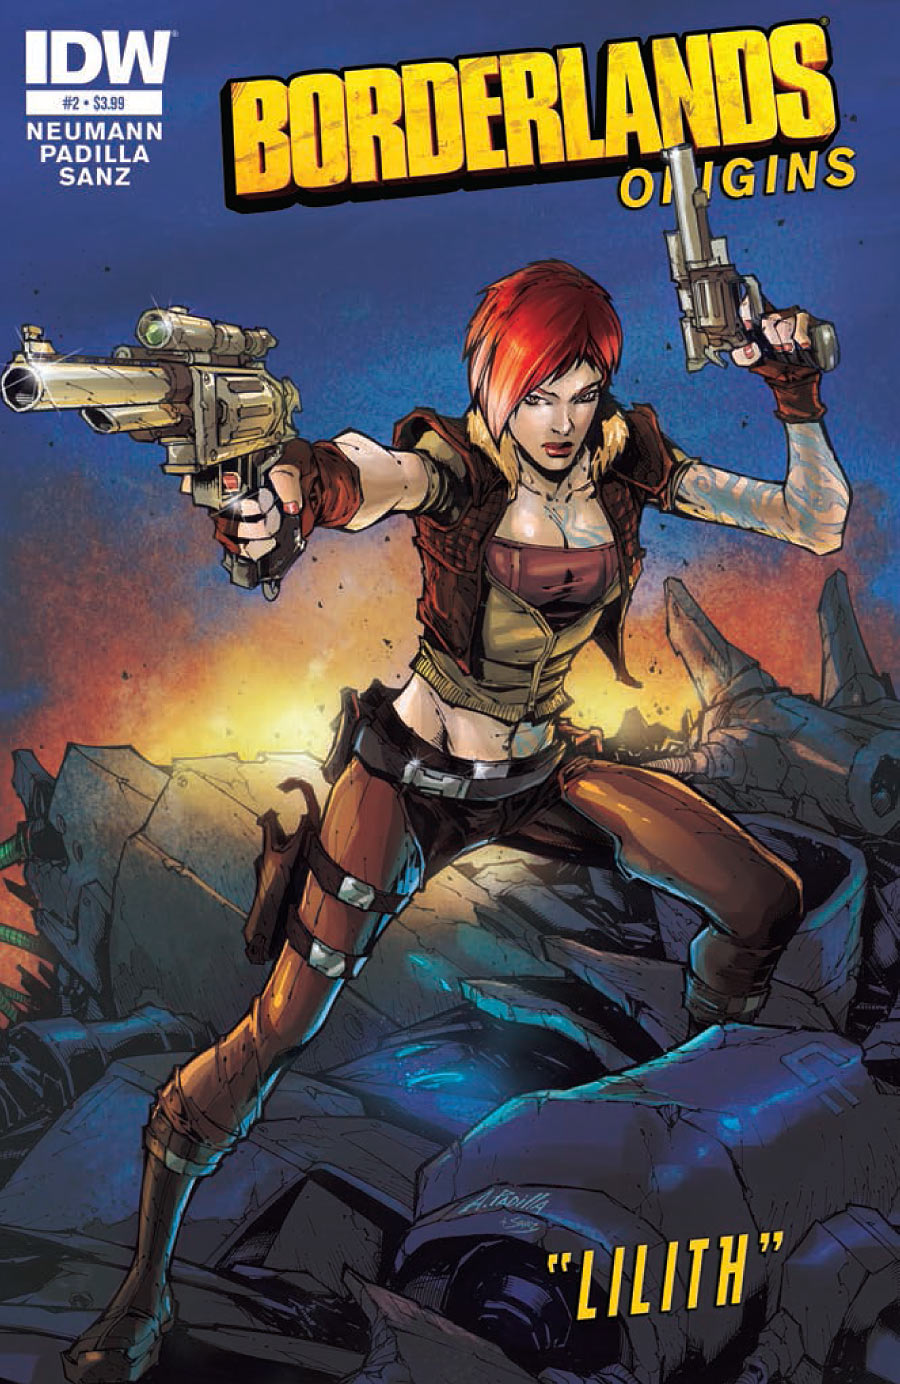 borderlands 2 intro song free download